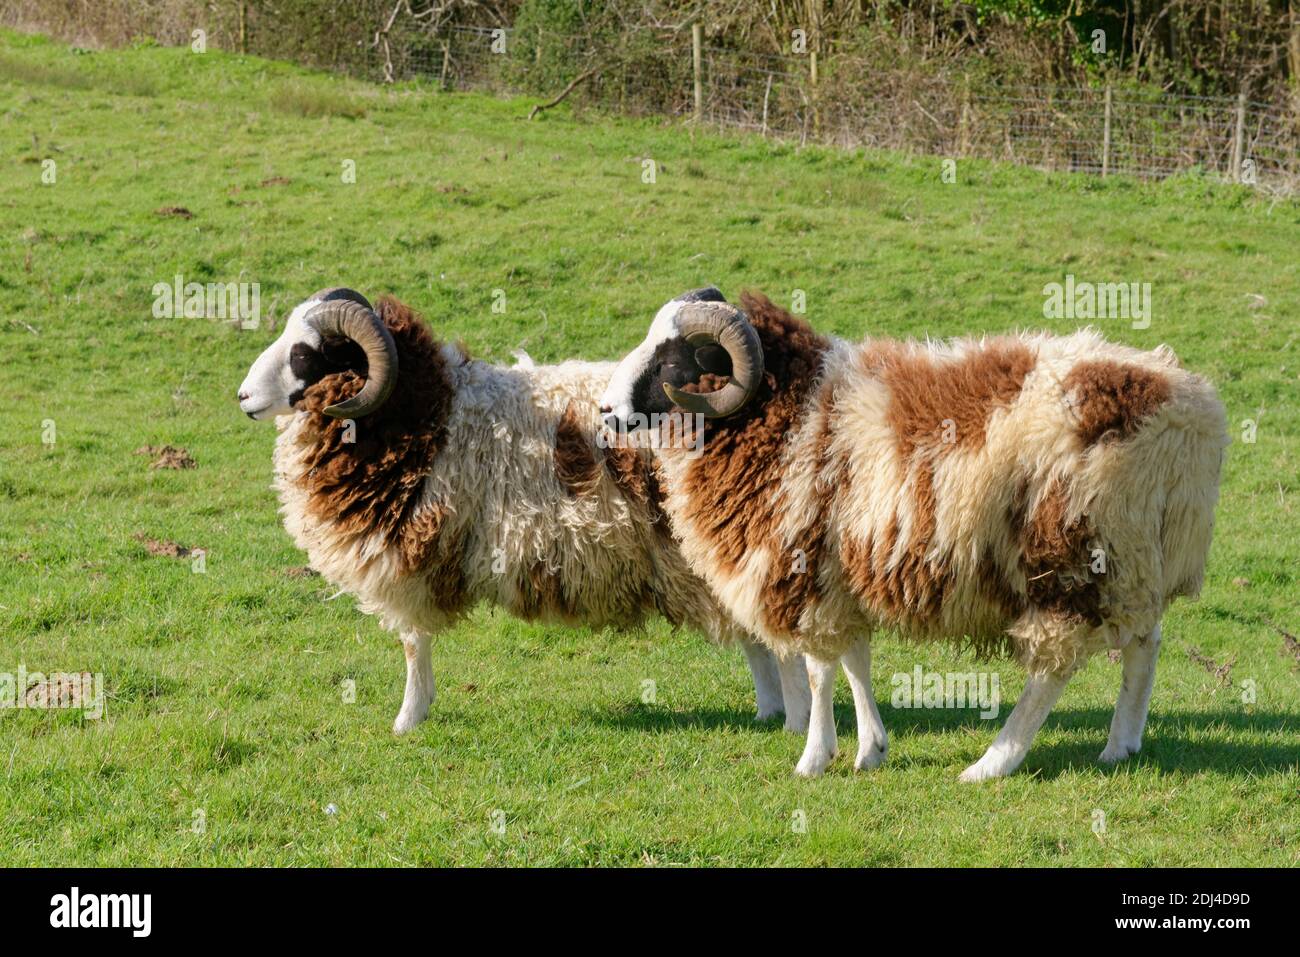 Jacob sheep (Ovis aries) two rams of this ancient British breed standing on pastureland, Wiltshire, UK, March. Stock Photo